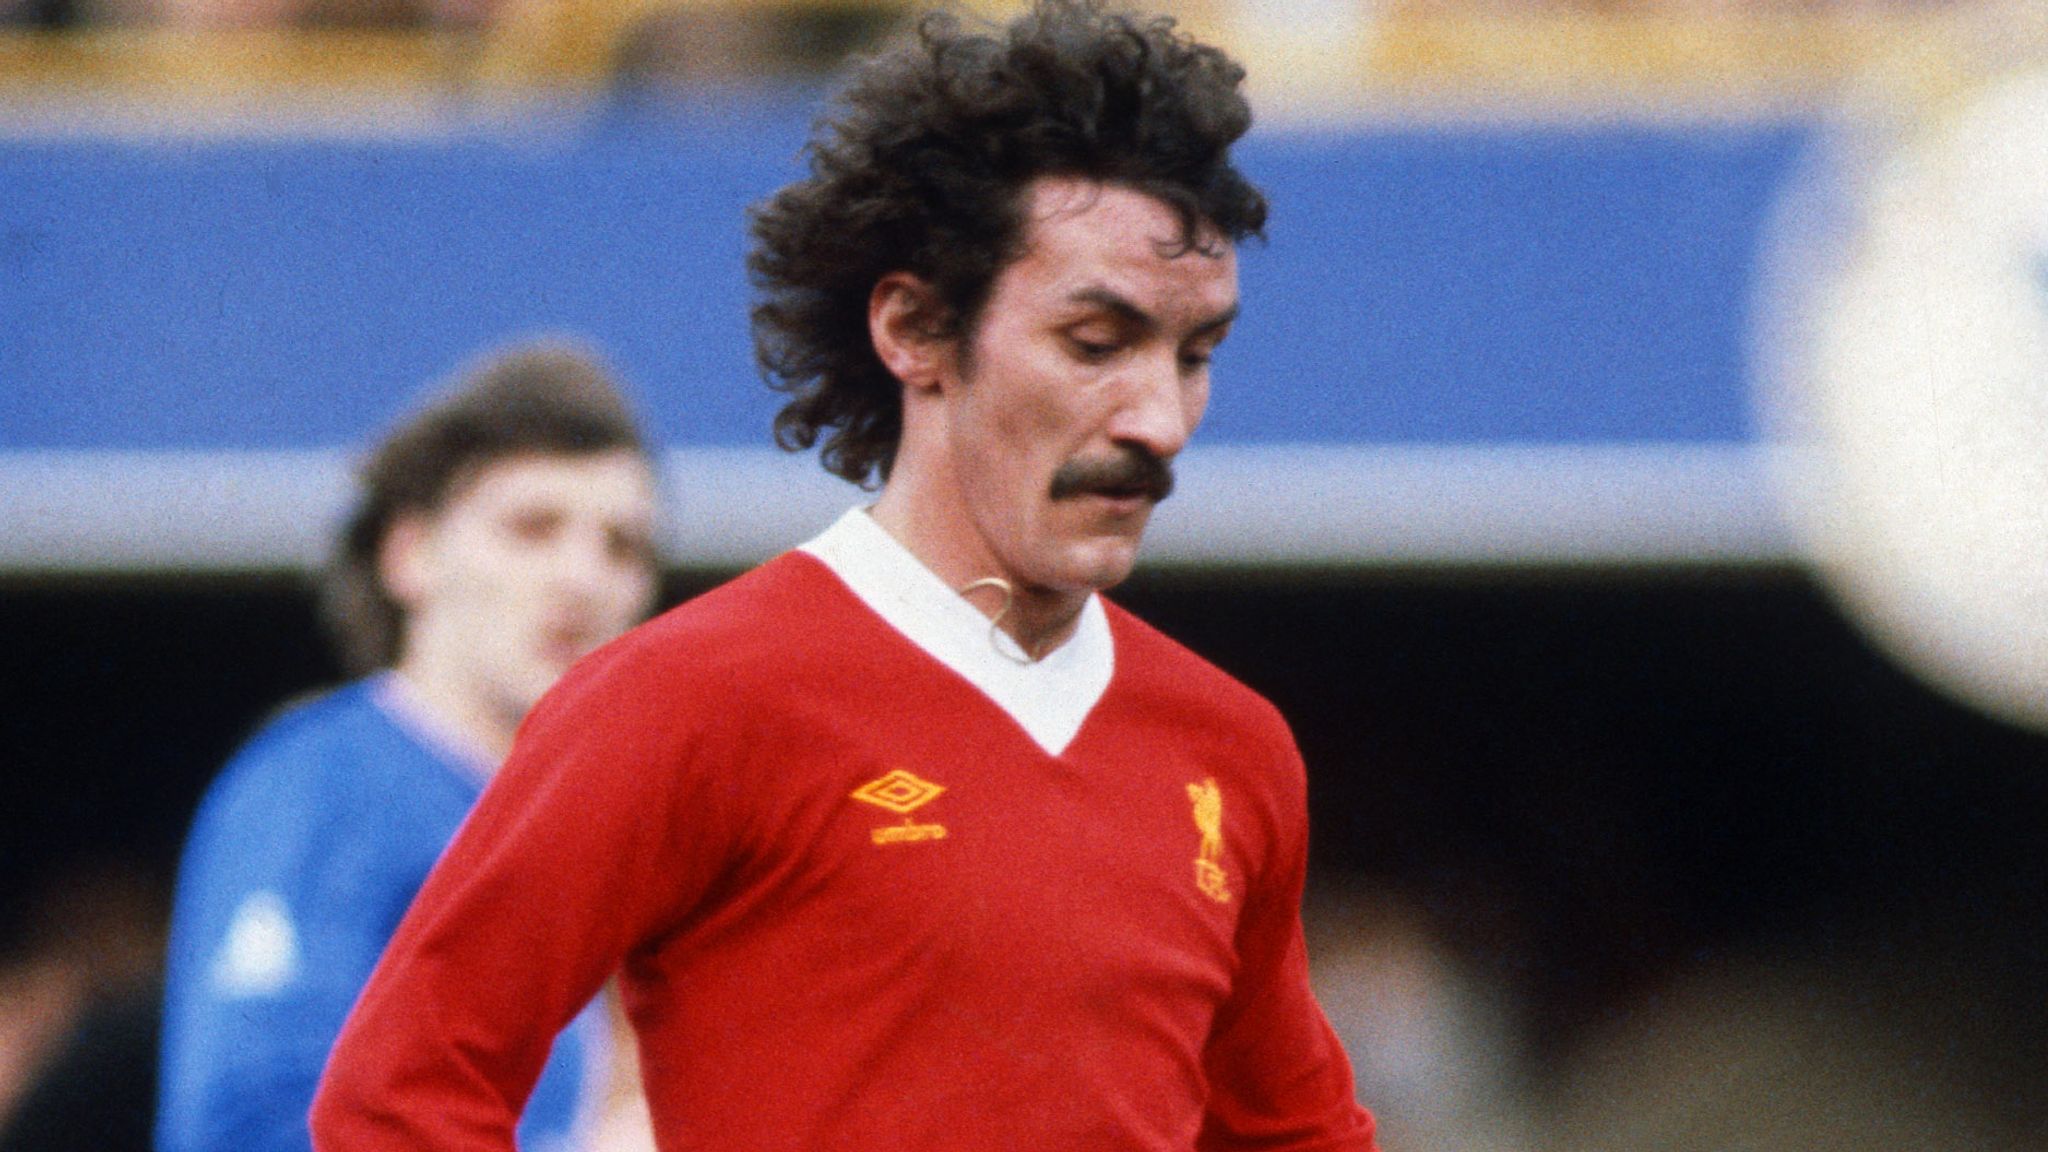 Liverpool legend Terry McDermott confirms he has been diagnosed with dementia | Football News | Sky Sports